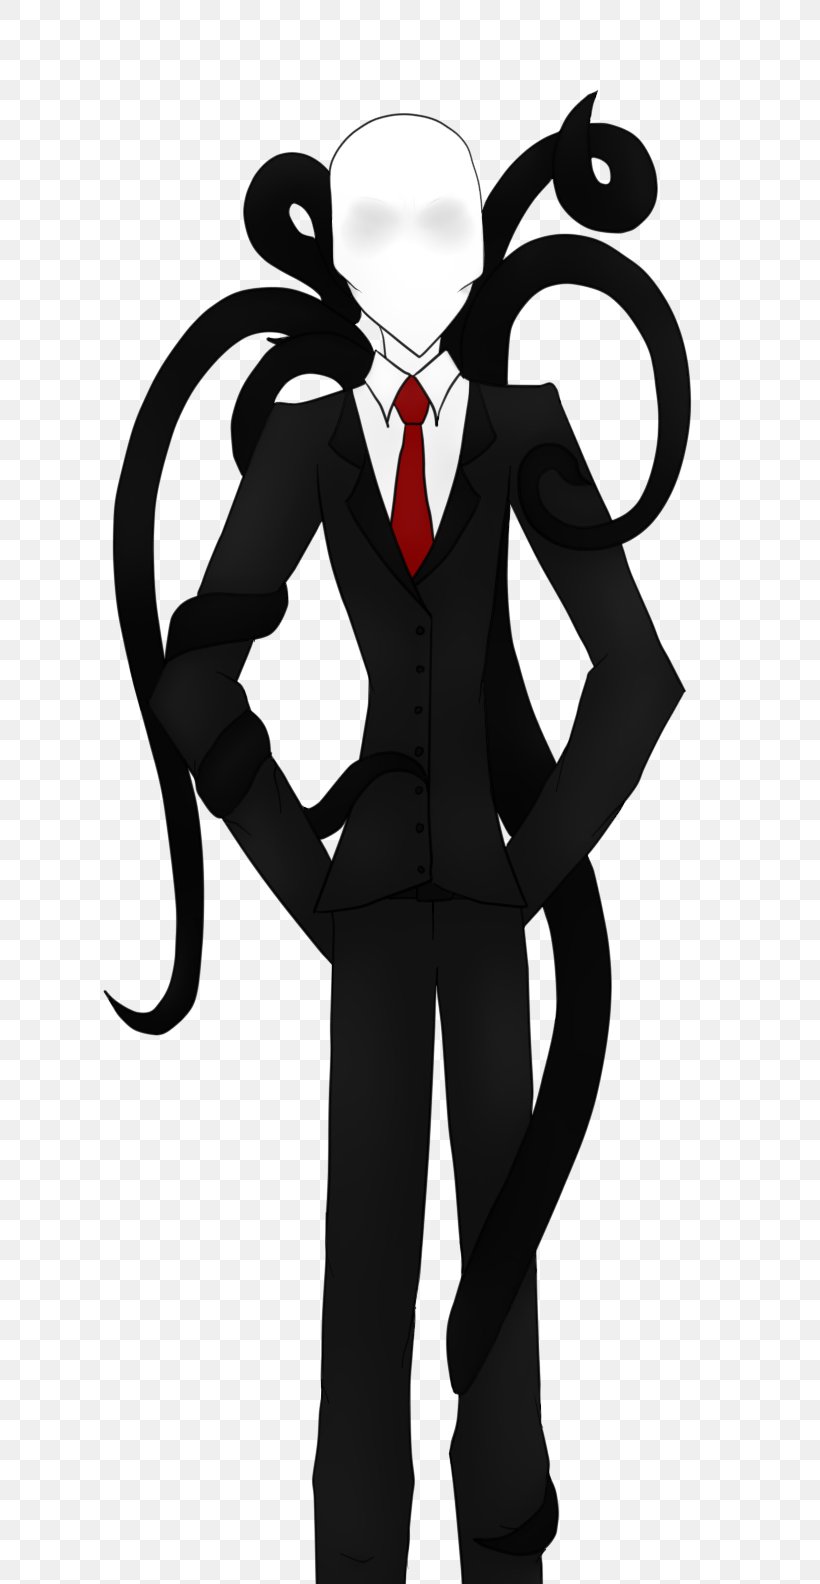 Slender: The Eight Pages Slenderman Creepypasta Clip Art, PNG, 720x1584px, Slender The Eight Pages, Animation, Costume, Creepypasta, Fictional Character Download Free